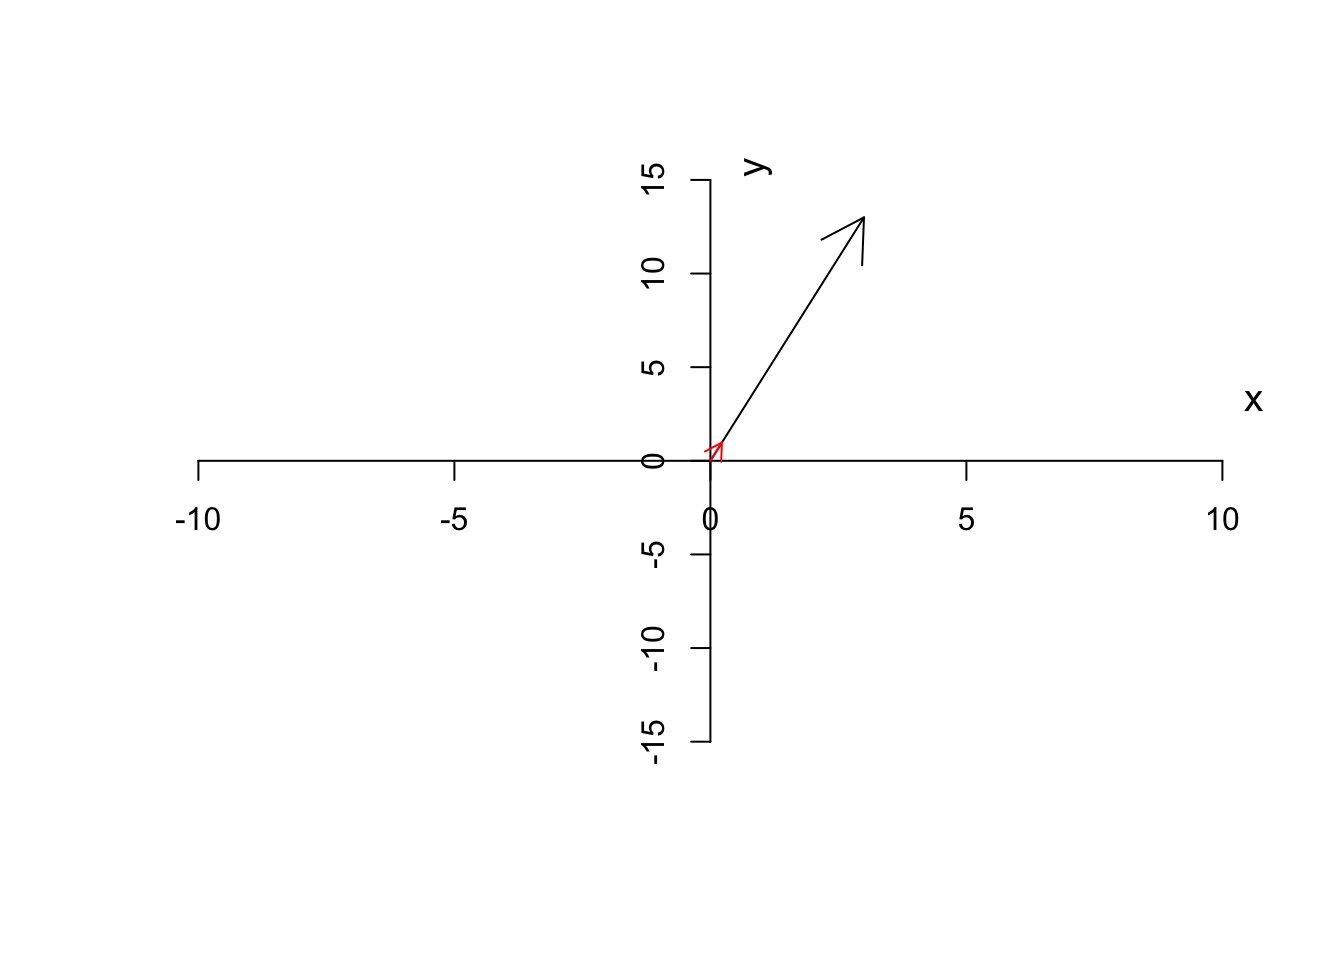 Unit vector of a has been depicted